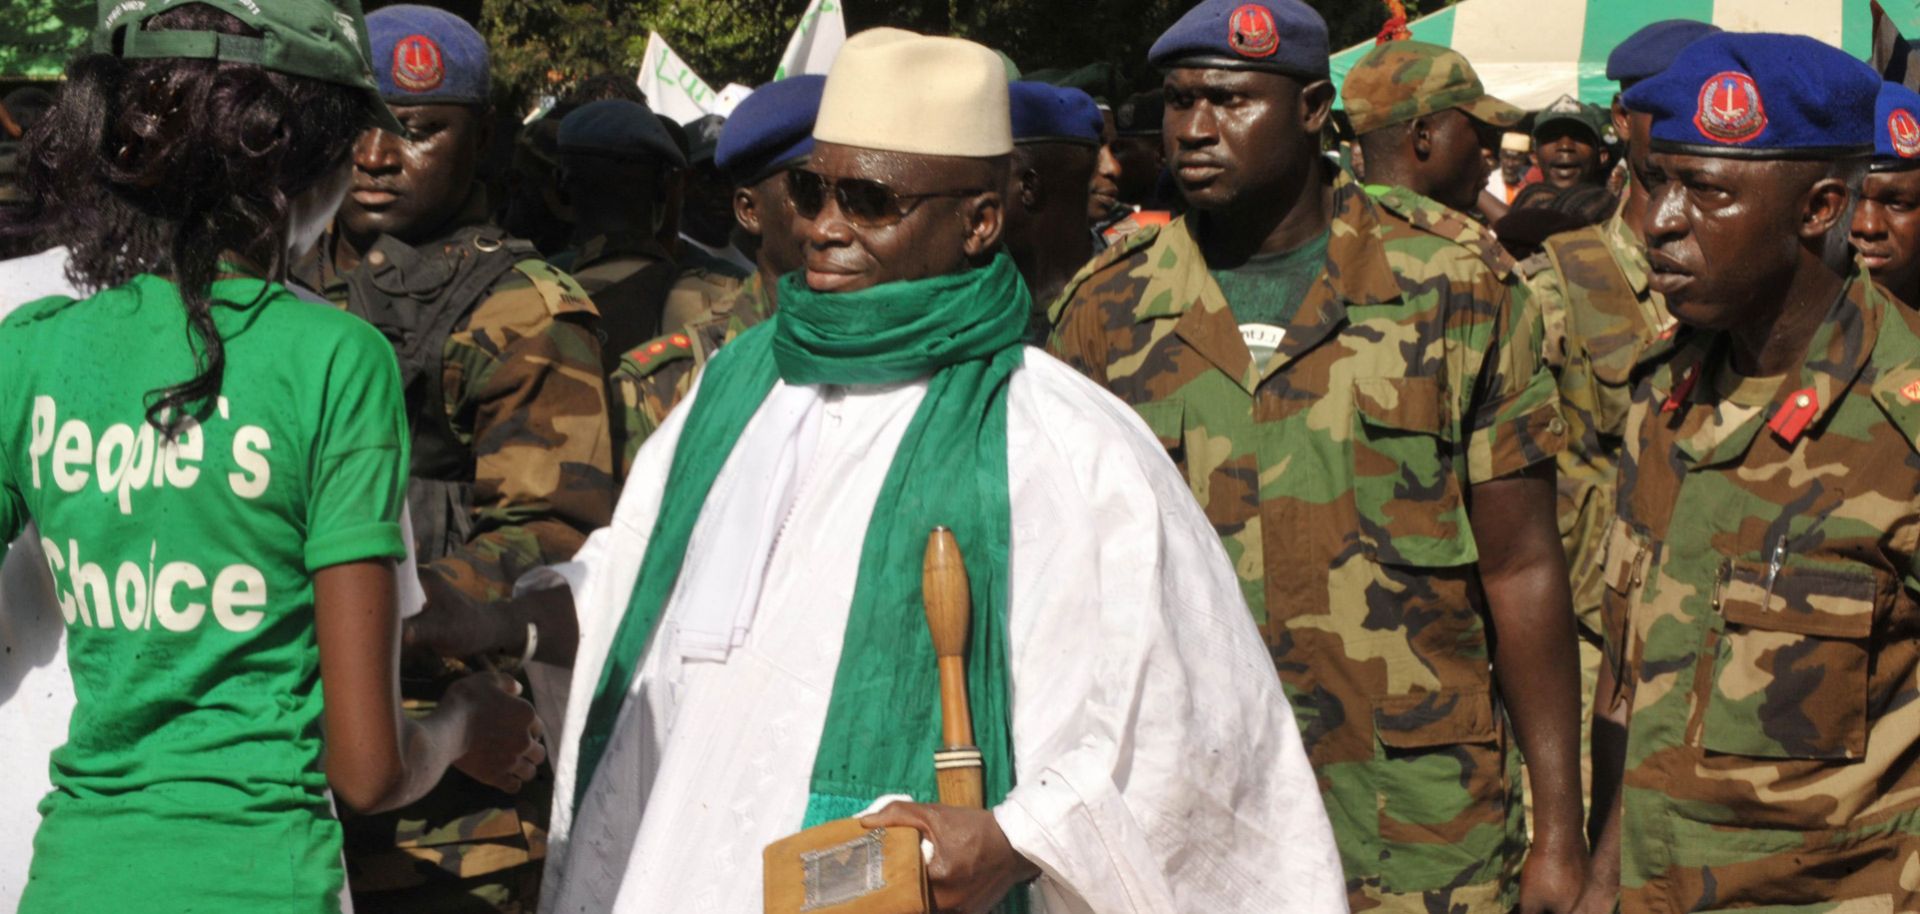 On Wednesday, Gambia became the third country, after Burundi and South Africa, to announce its withdrawal from the International Criminal Court, highlighting the body's inefficacy and its disproportionate tendency to prosecute African leaders.